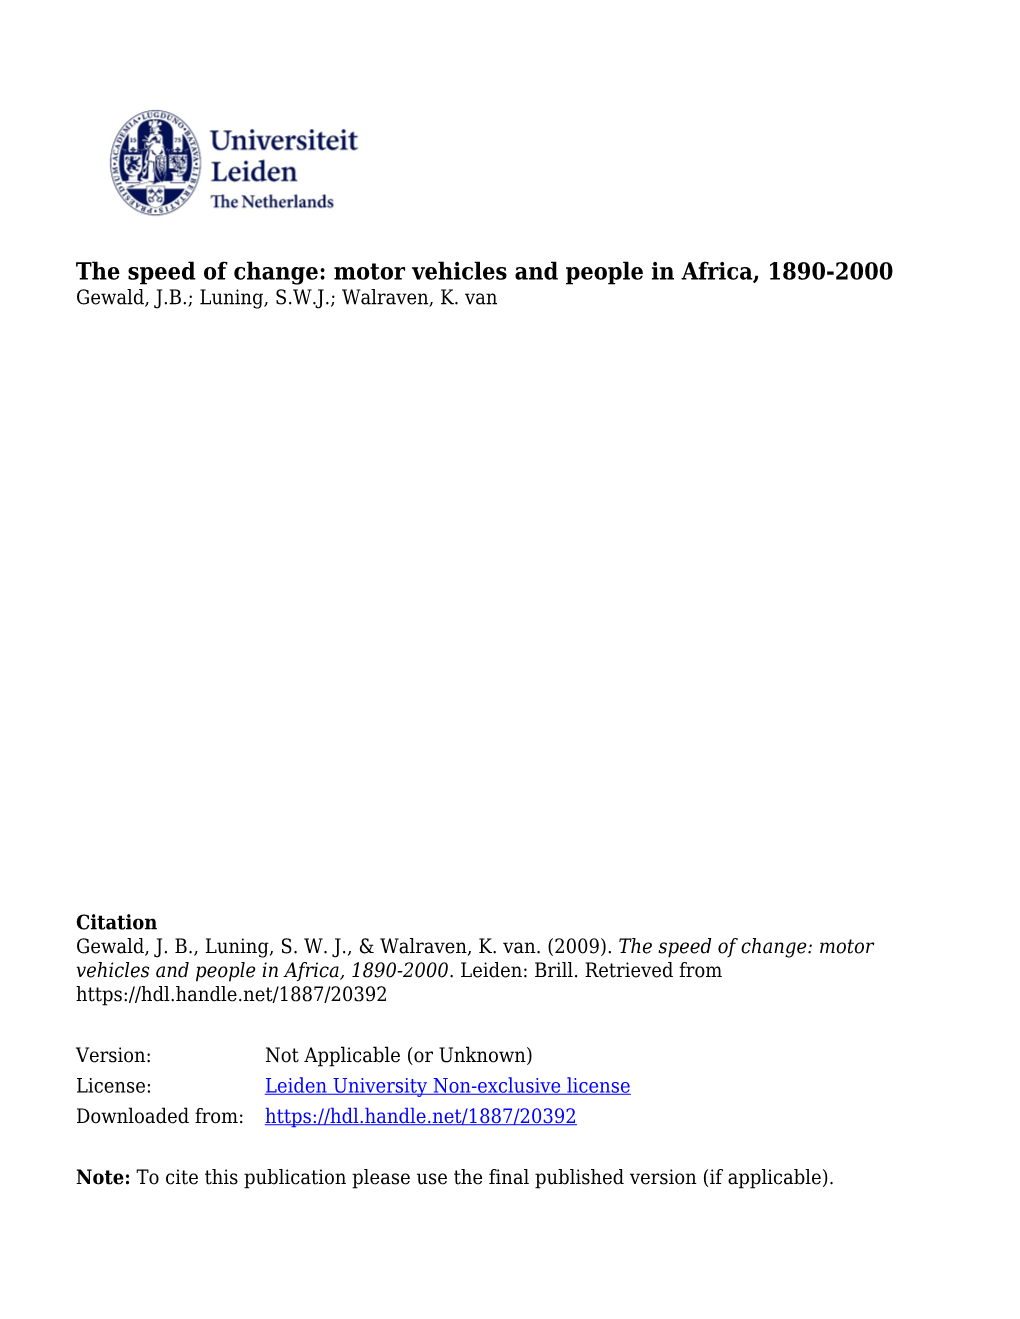 The Speed of Change: Motor Vehicles and People in Africa, 1890-2000 Gewald, J.B.; Luning, S.W.J.; Walraven, K